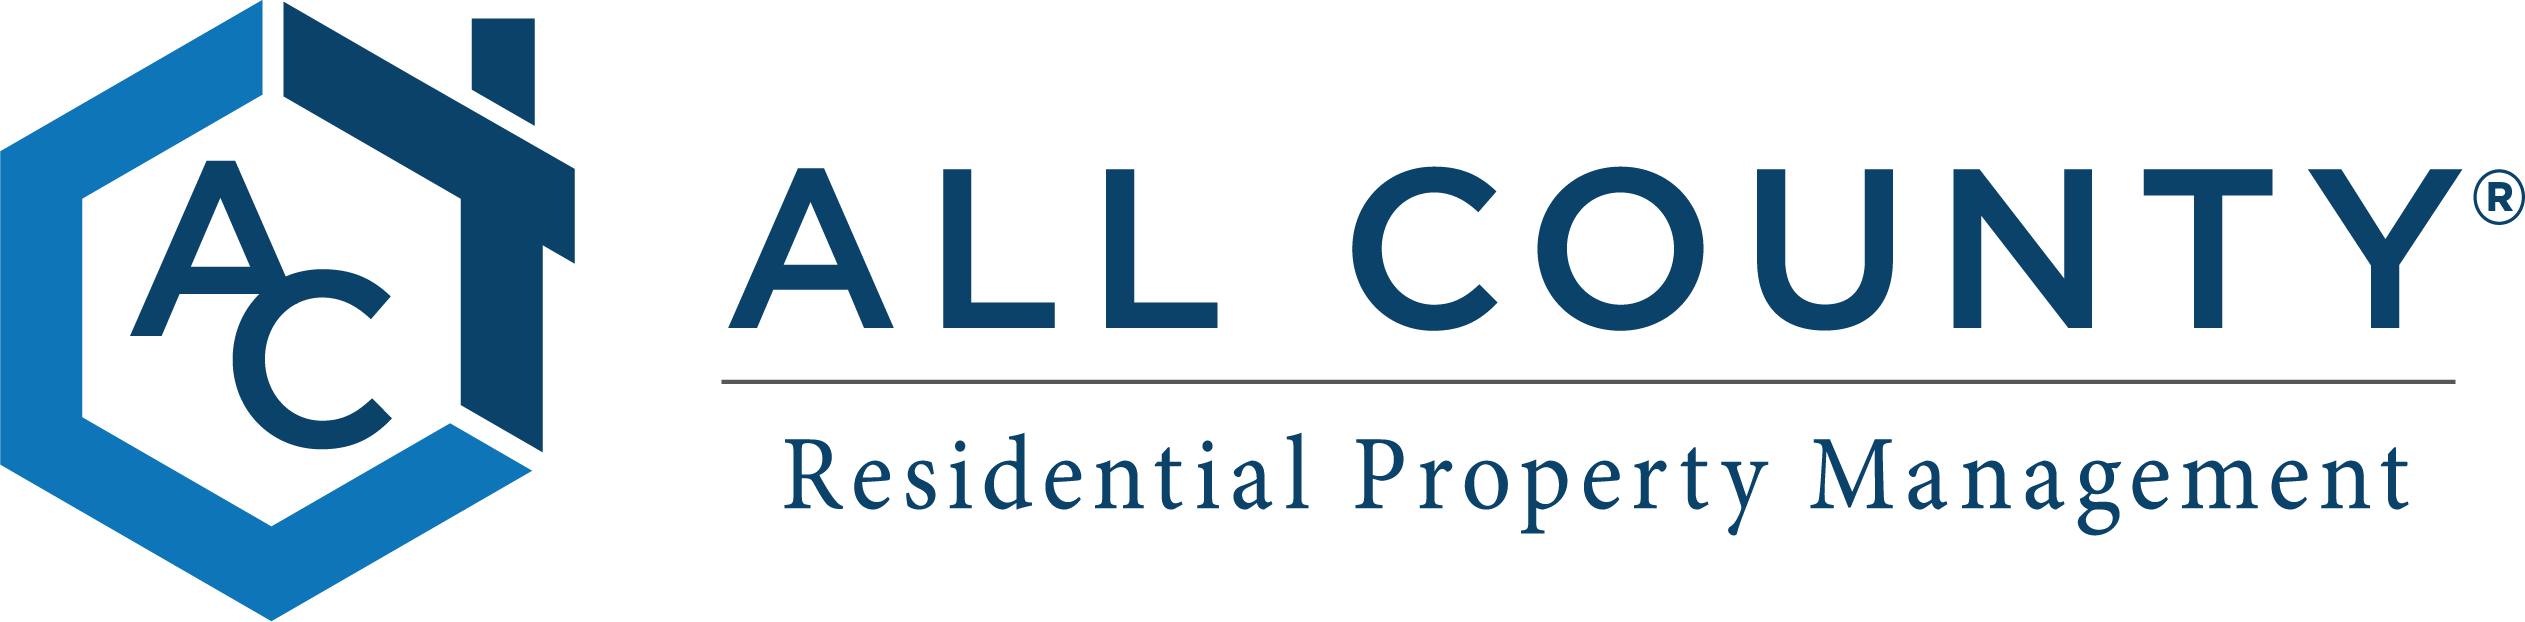 All County Residential Property Management